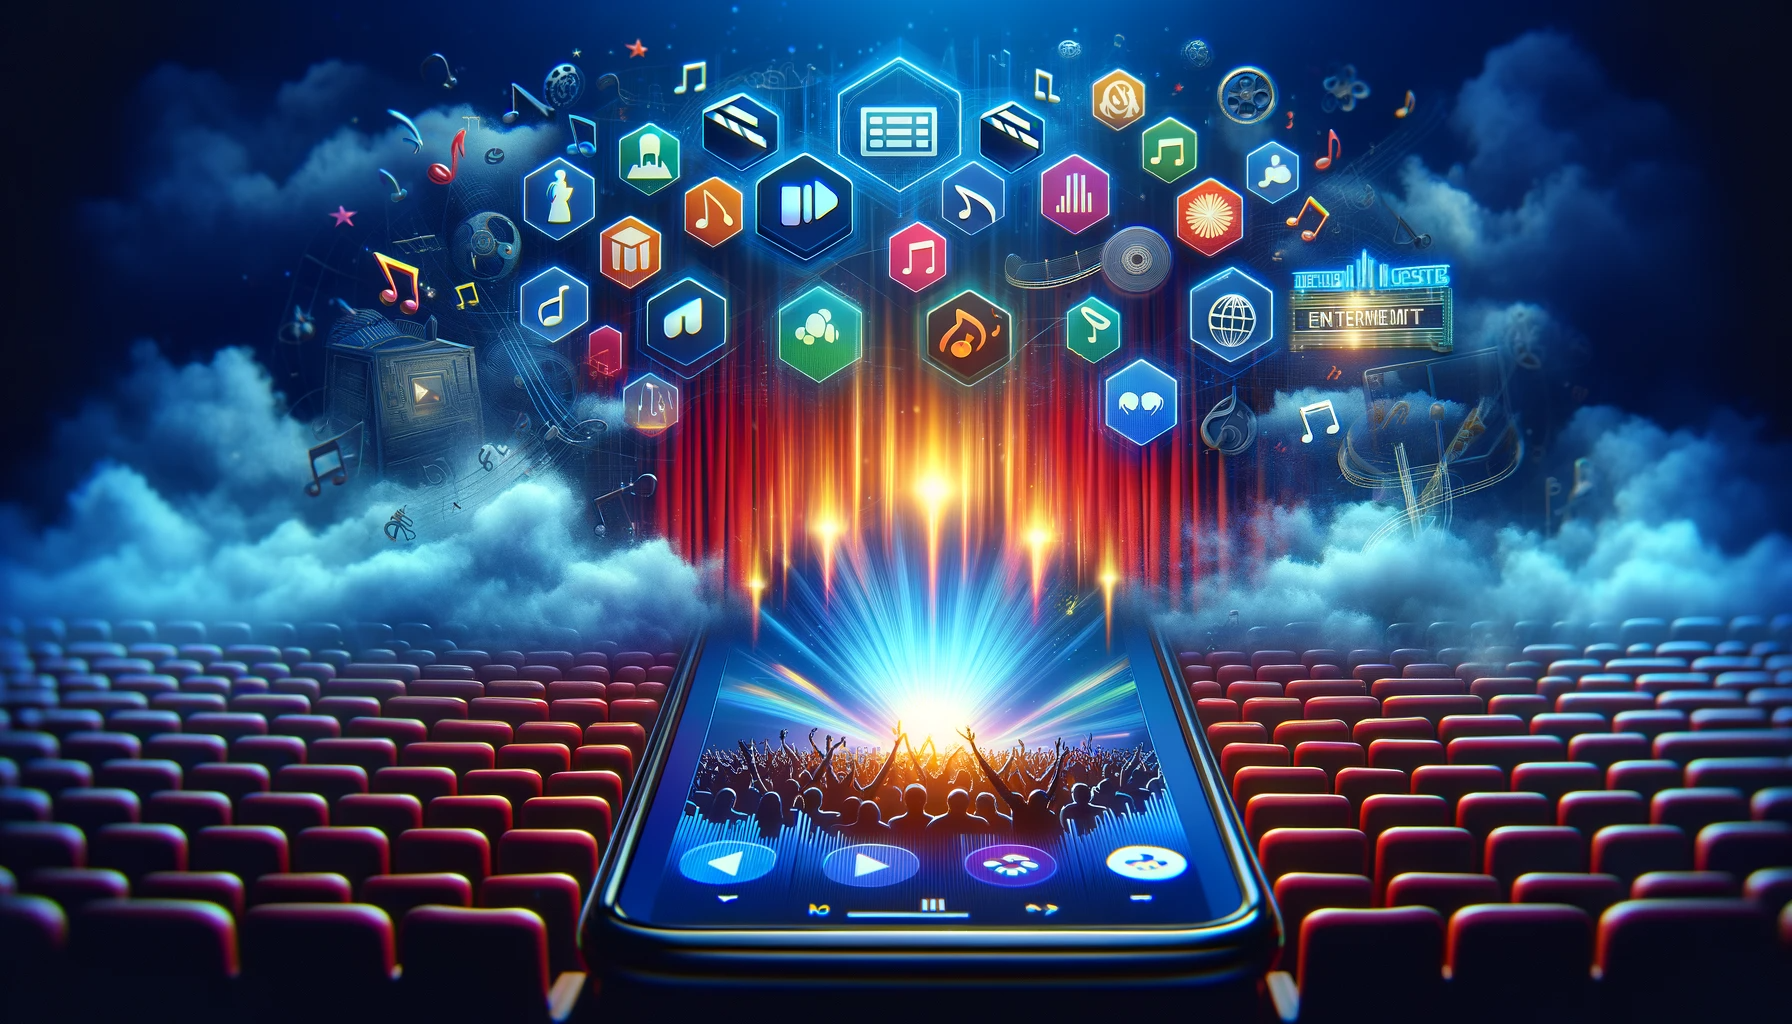 A conceptual landscape image of an Entertainment and Media mobile app